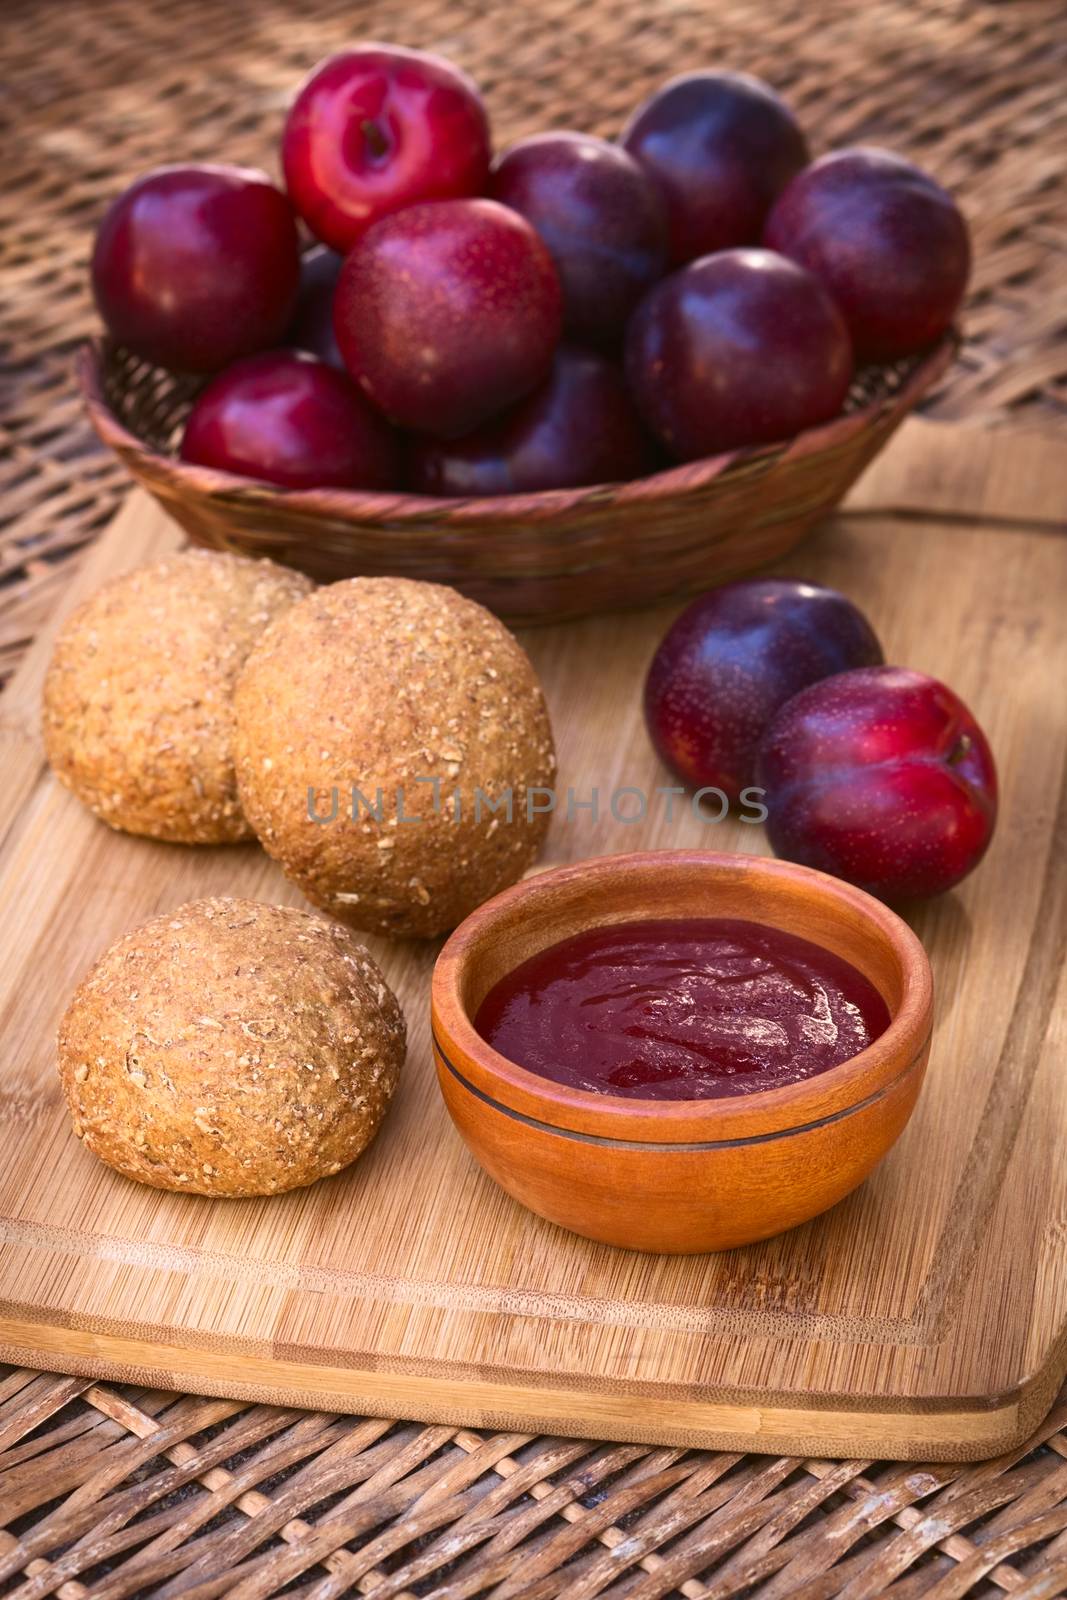 Small wooden bowl of plum jam with wholegrain buns and satsuma plums on wooden board photographed with natural light (Selective Focus, Focus in the middle of the jam and on the front of the bun next to it)